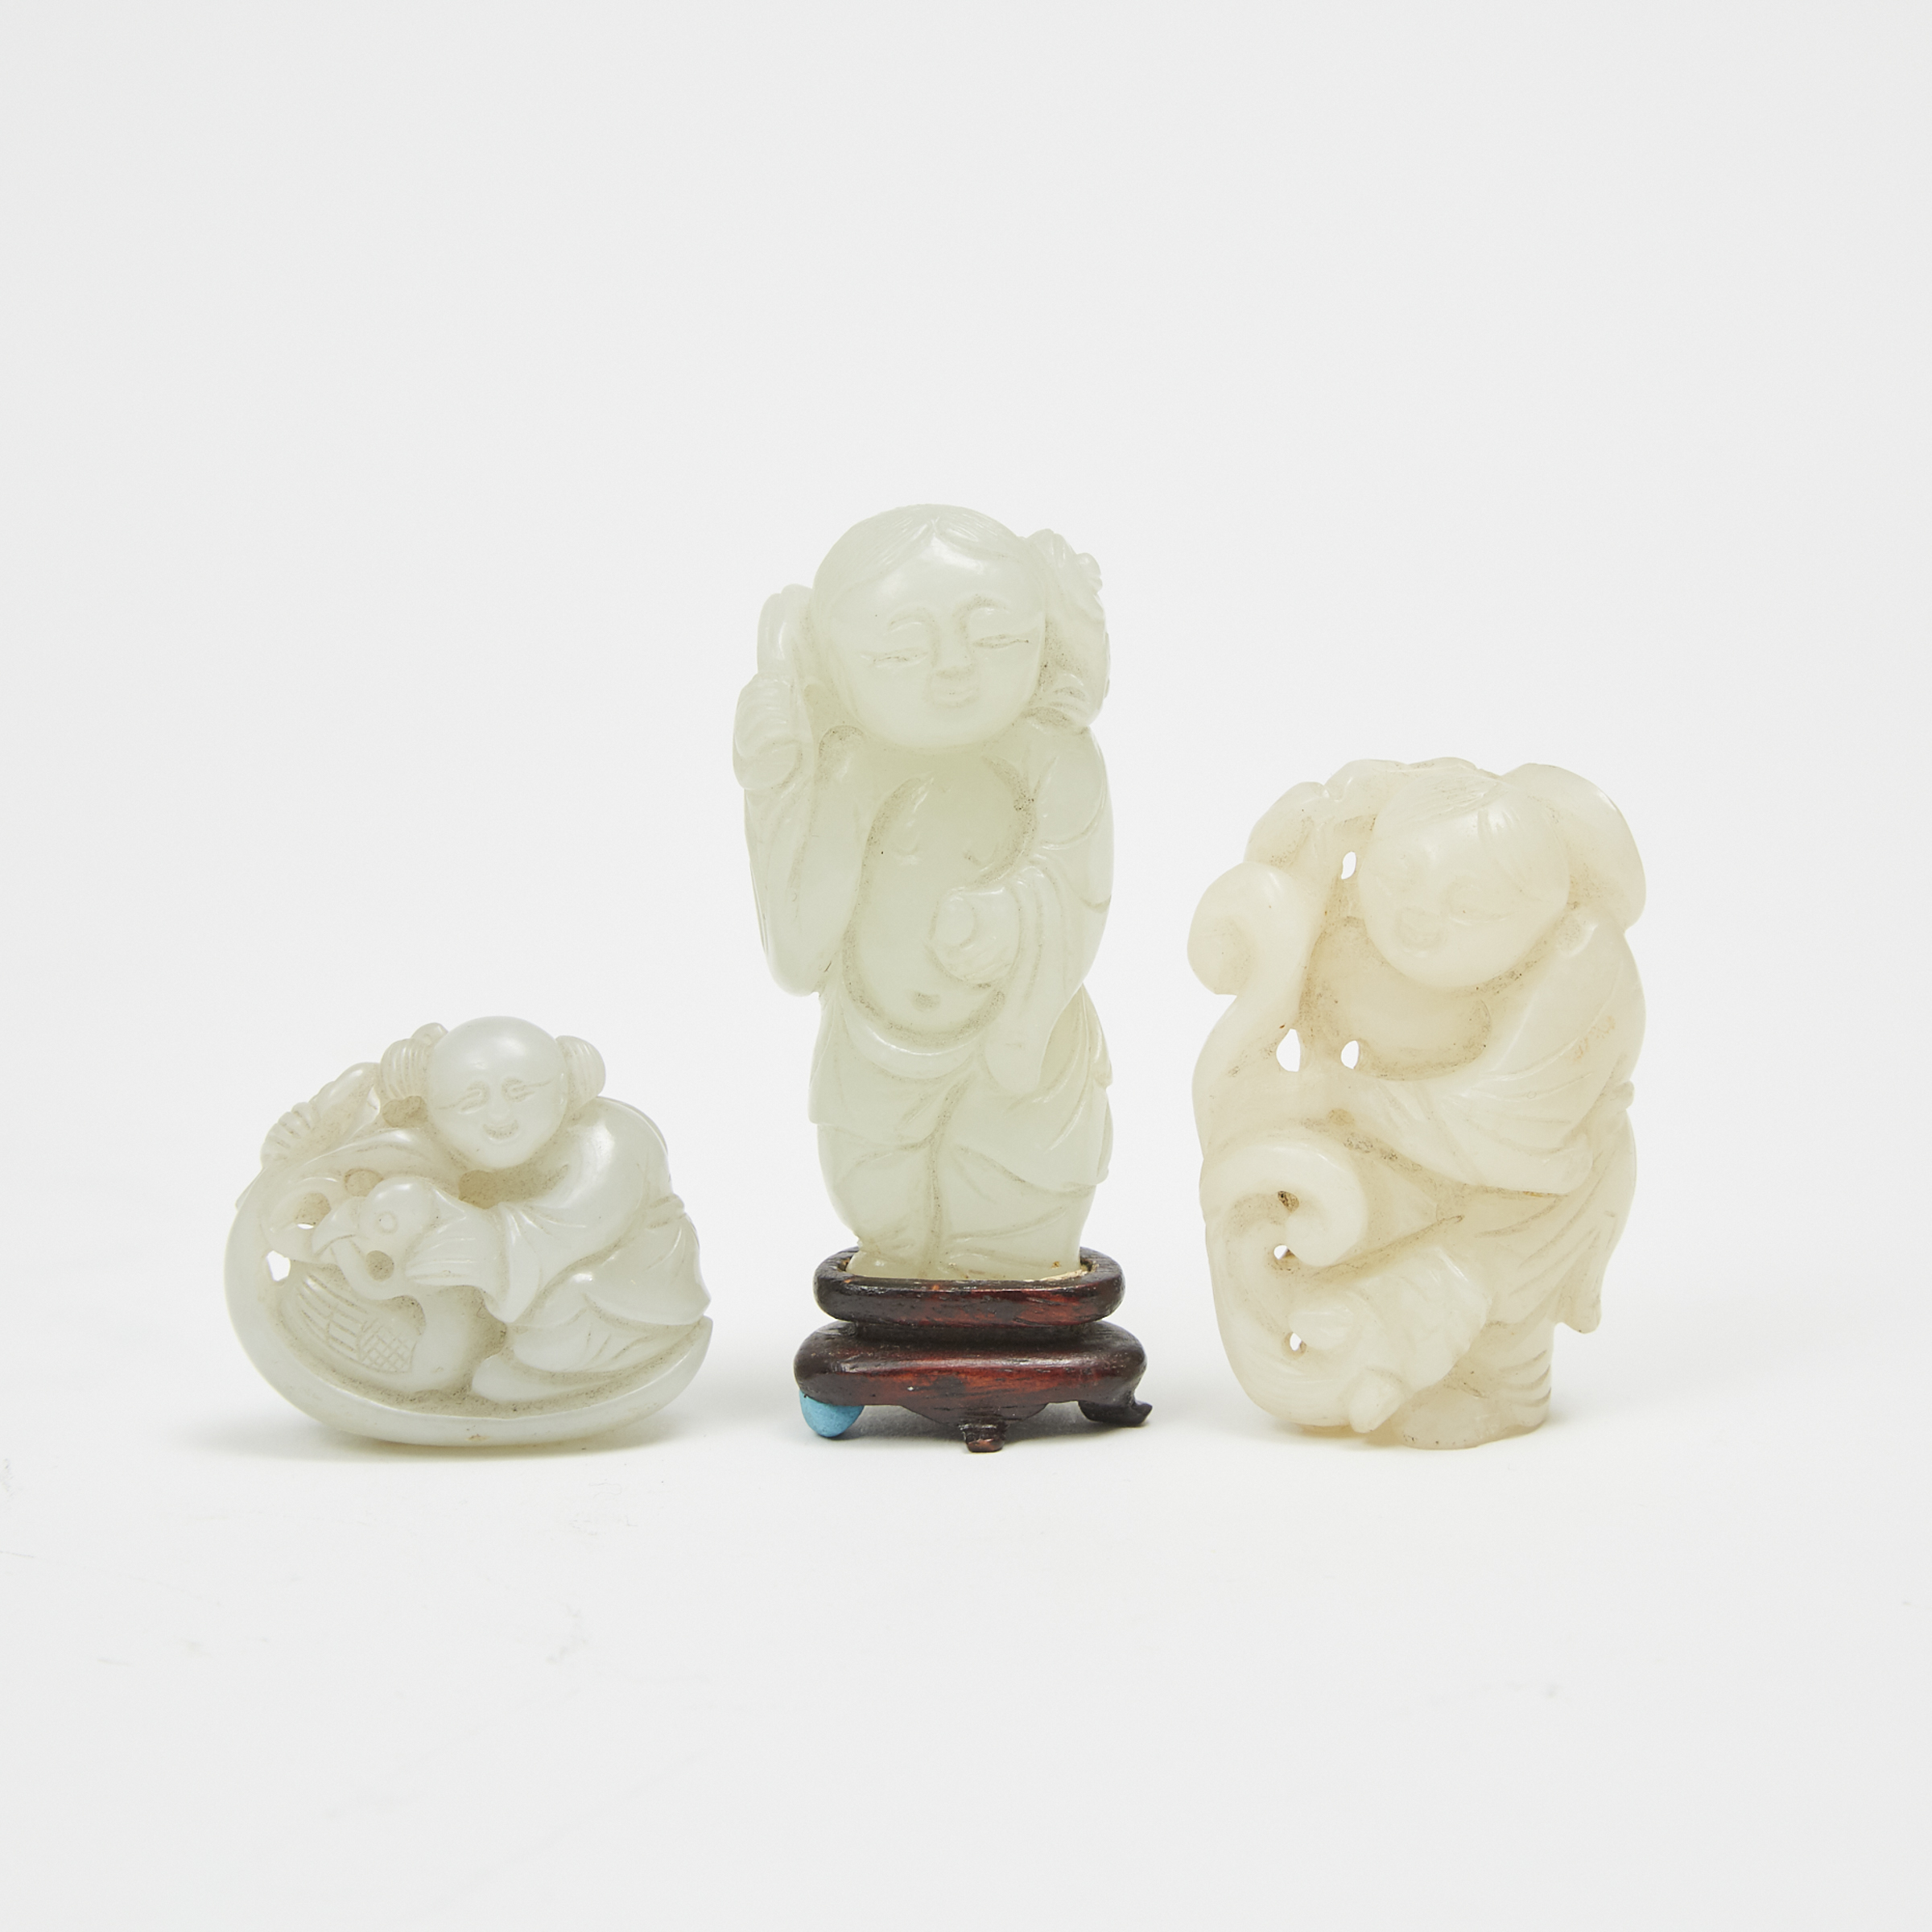 A Group of Three Jade Carved Boys